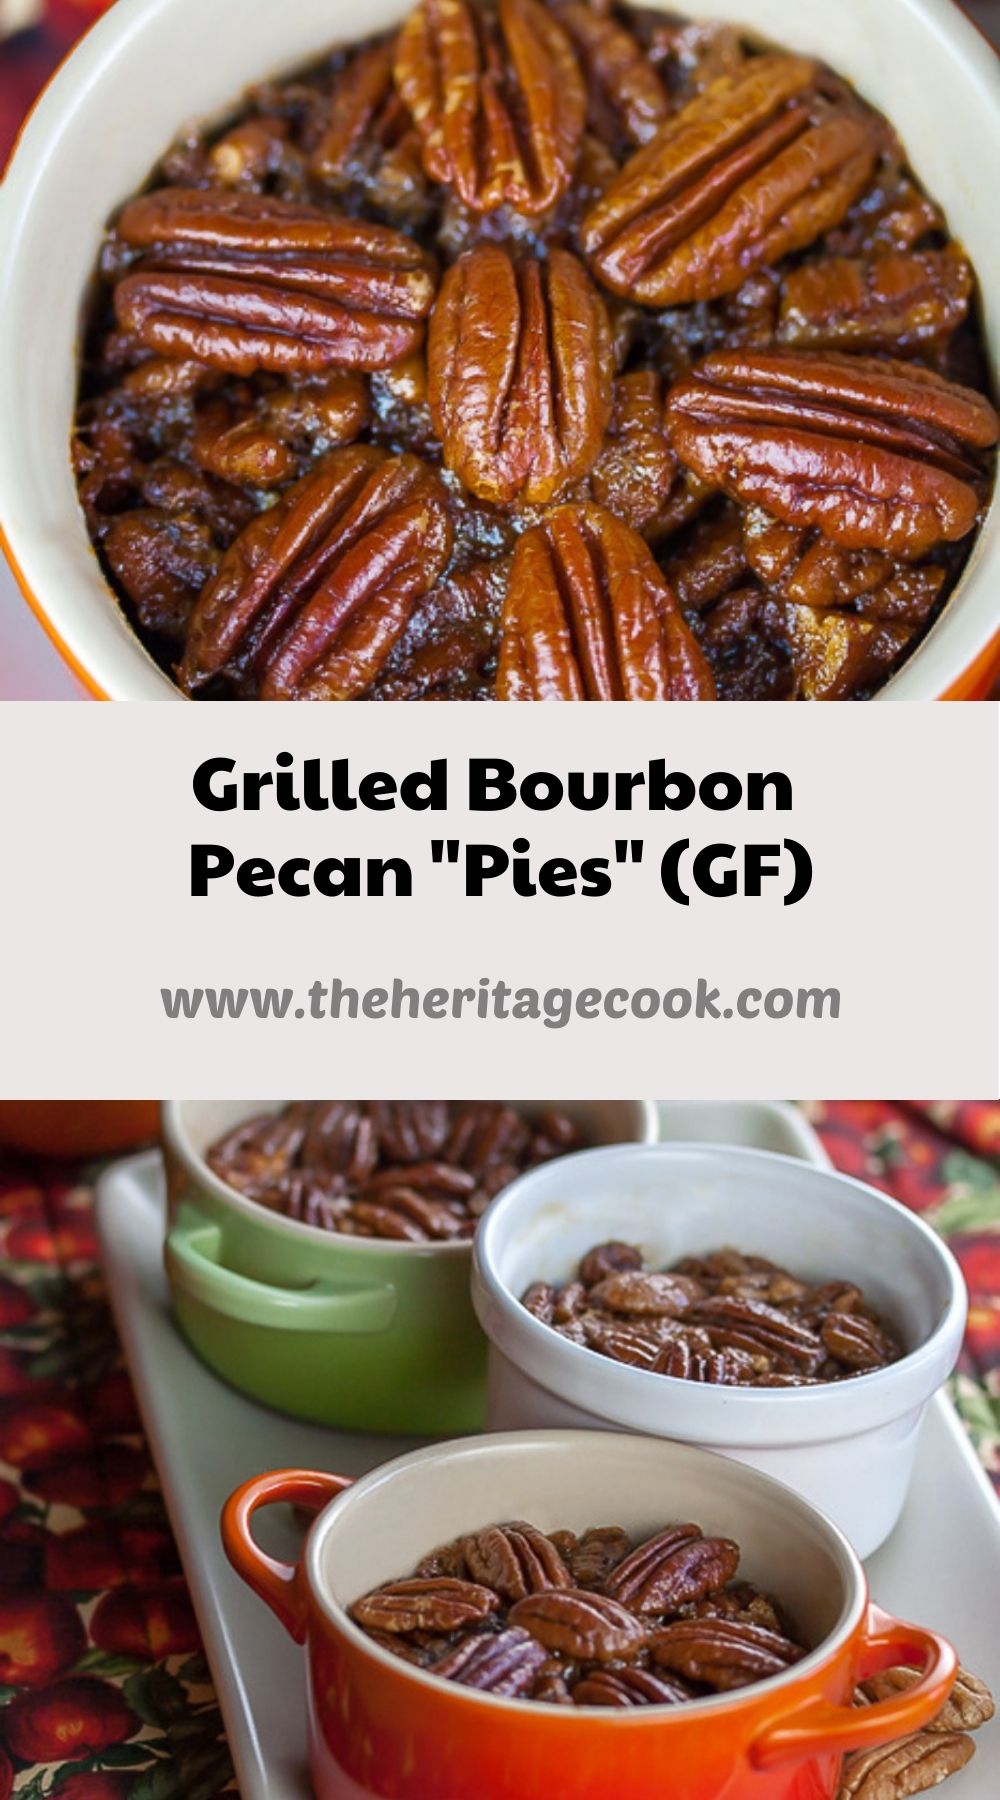 Grilled Crustless Bourbon Pecan Pies with Gluten Free Directions © 2020 Jane Bonacci, The Heritage Cook 